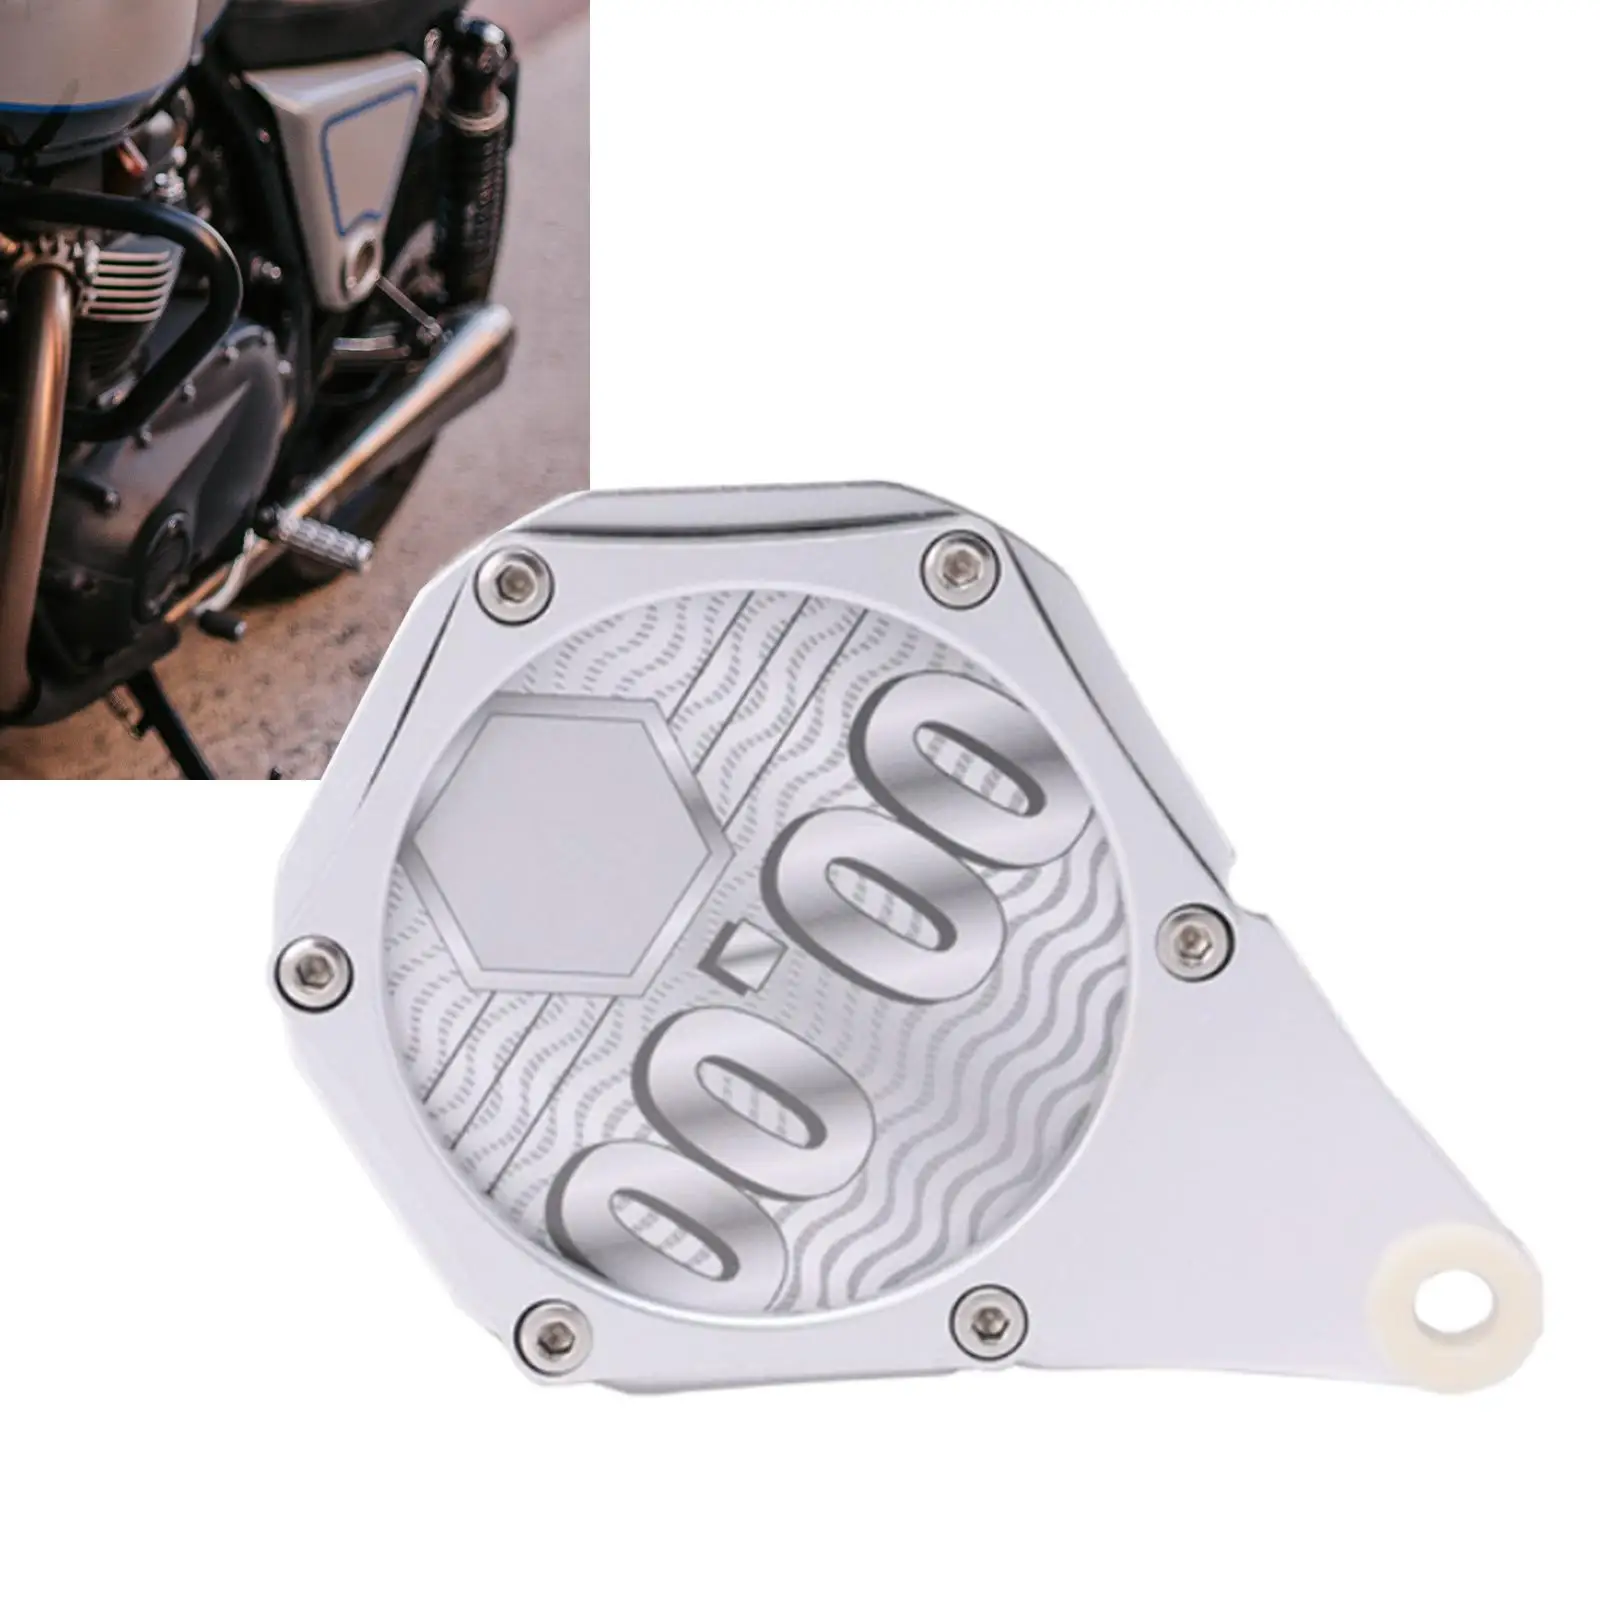 Tax Disc Plate Universal Water Resistant Motorcycle Supplies for Motor Scooter